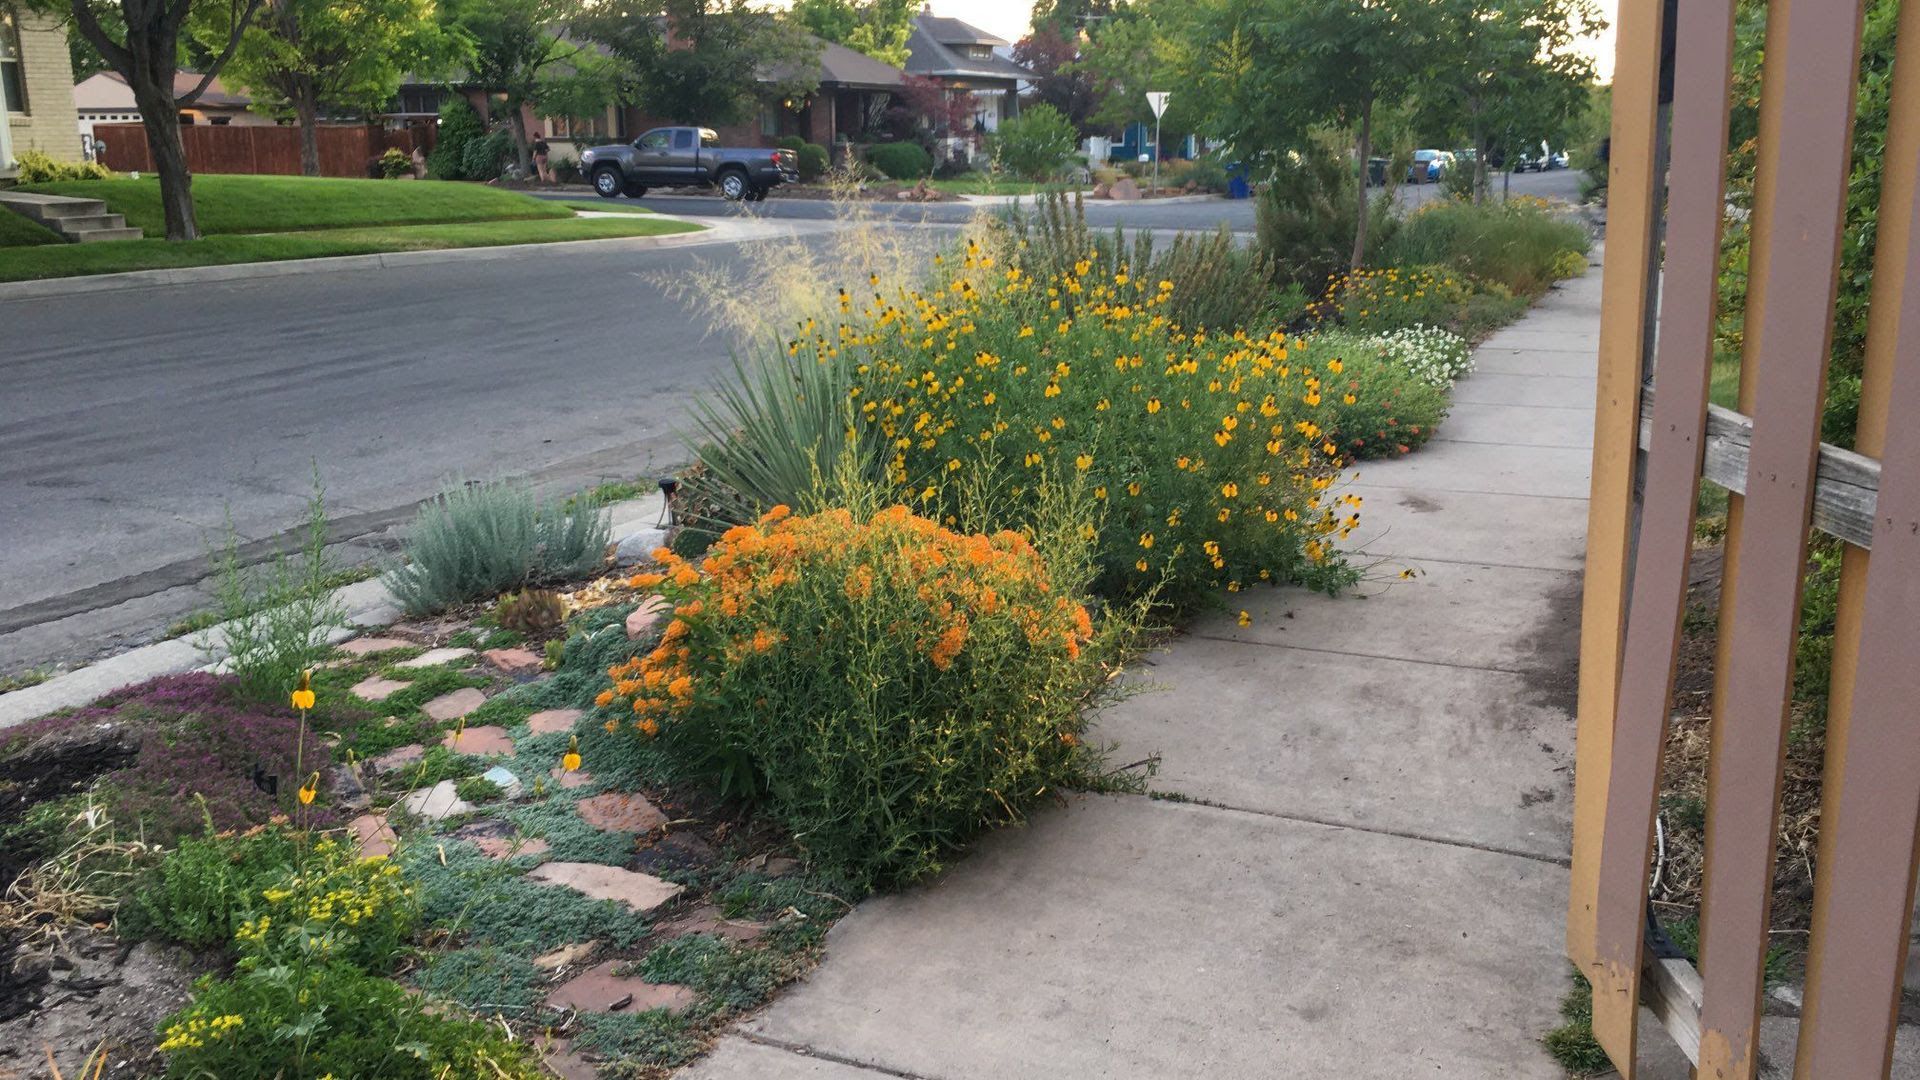 Orange, yellow and white flowers with grasses and a yucca near a cobblestone path in a garden along a sidewalk.